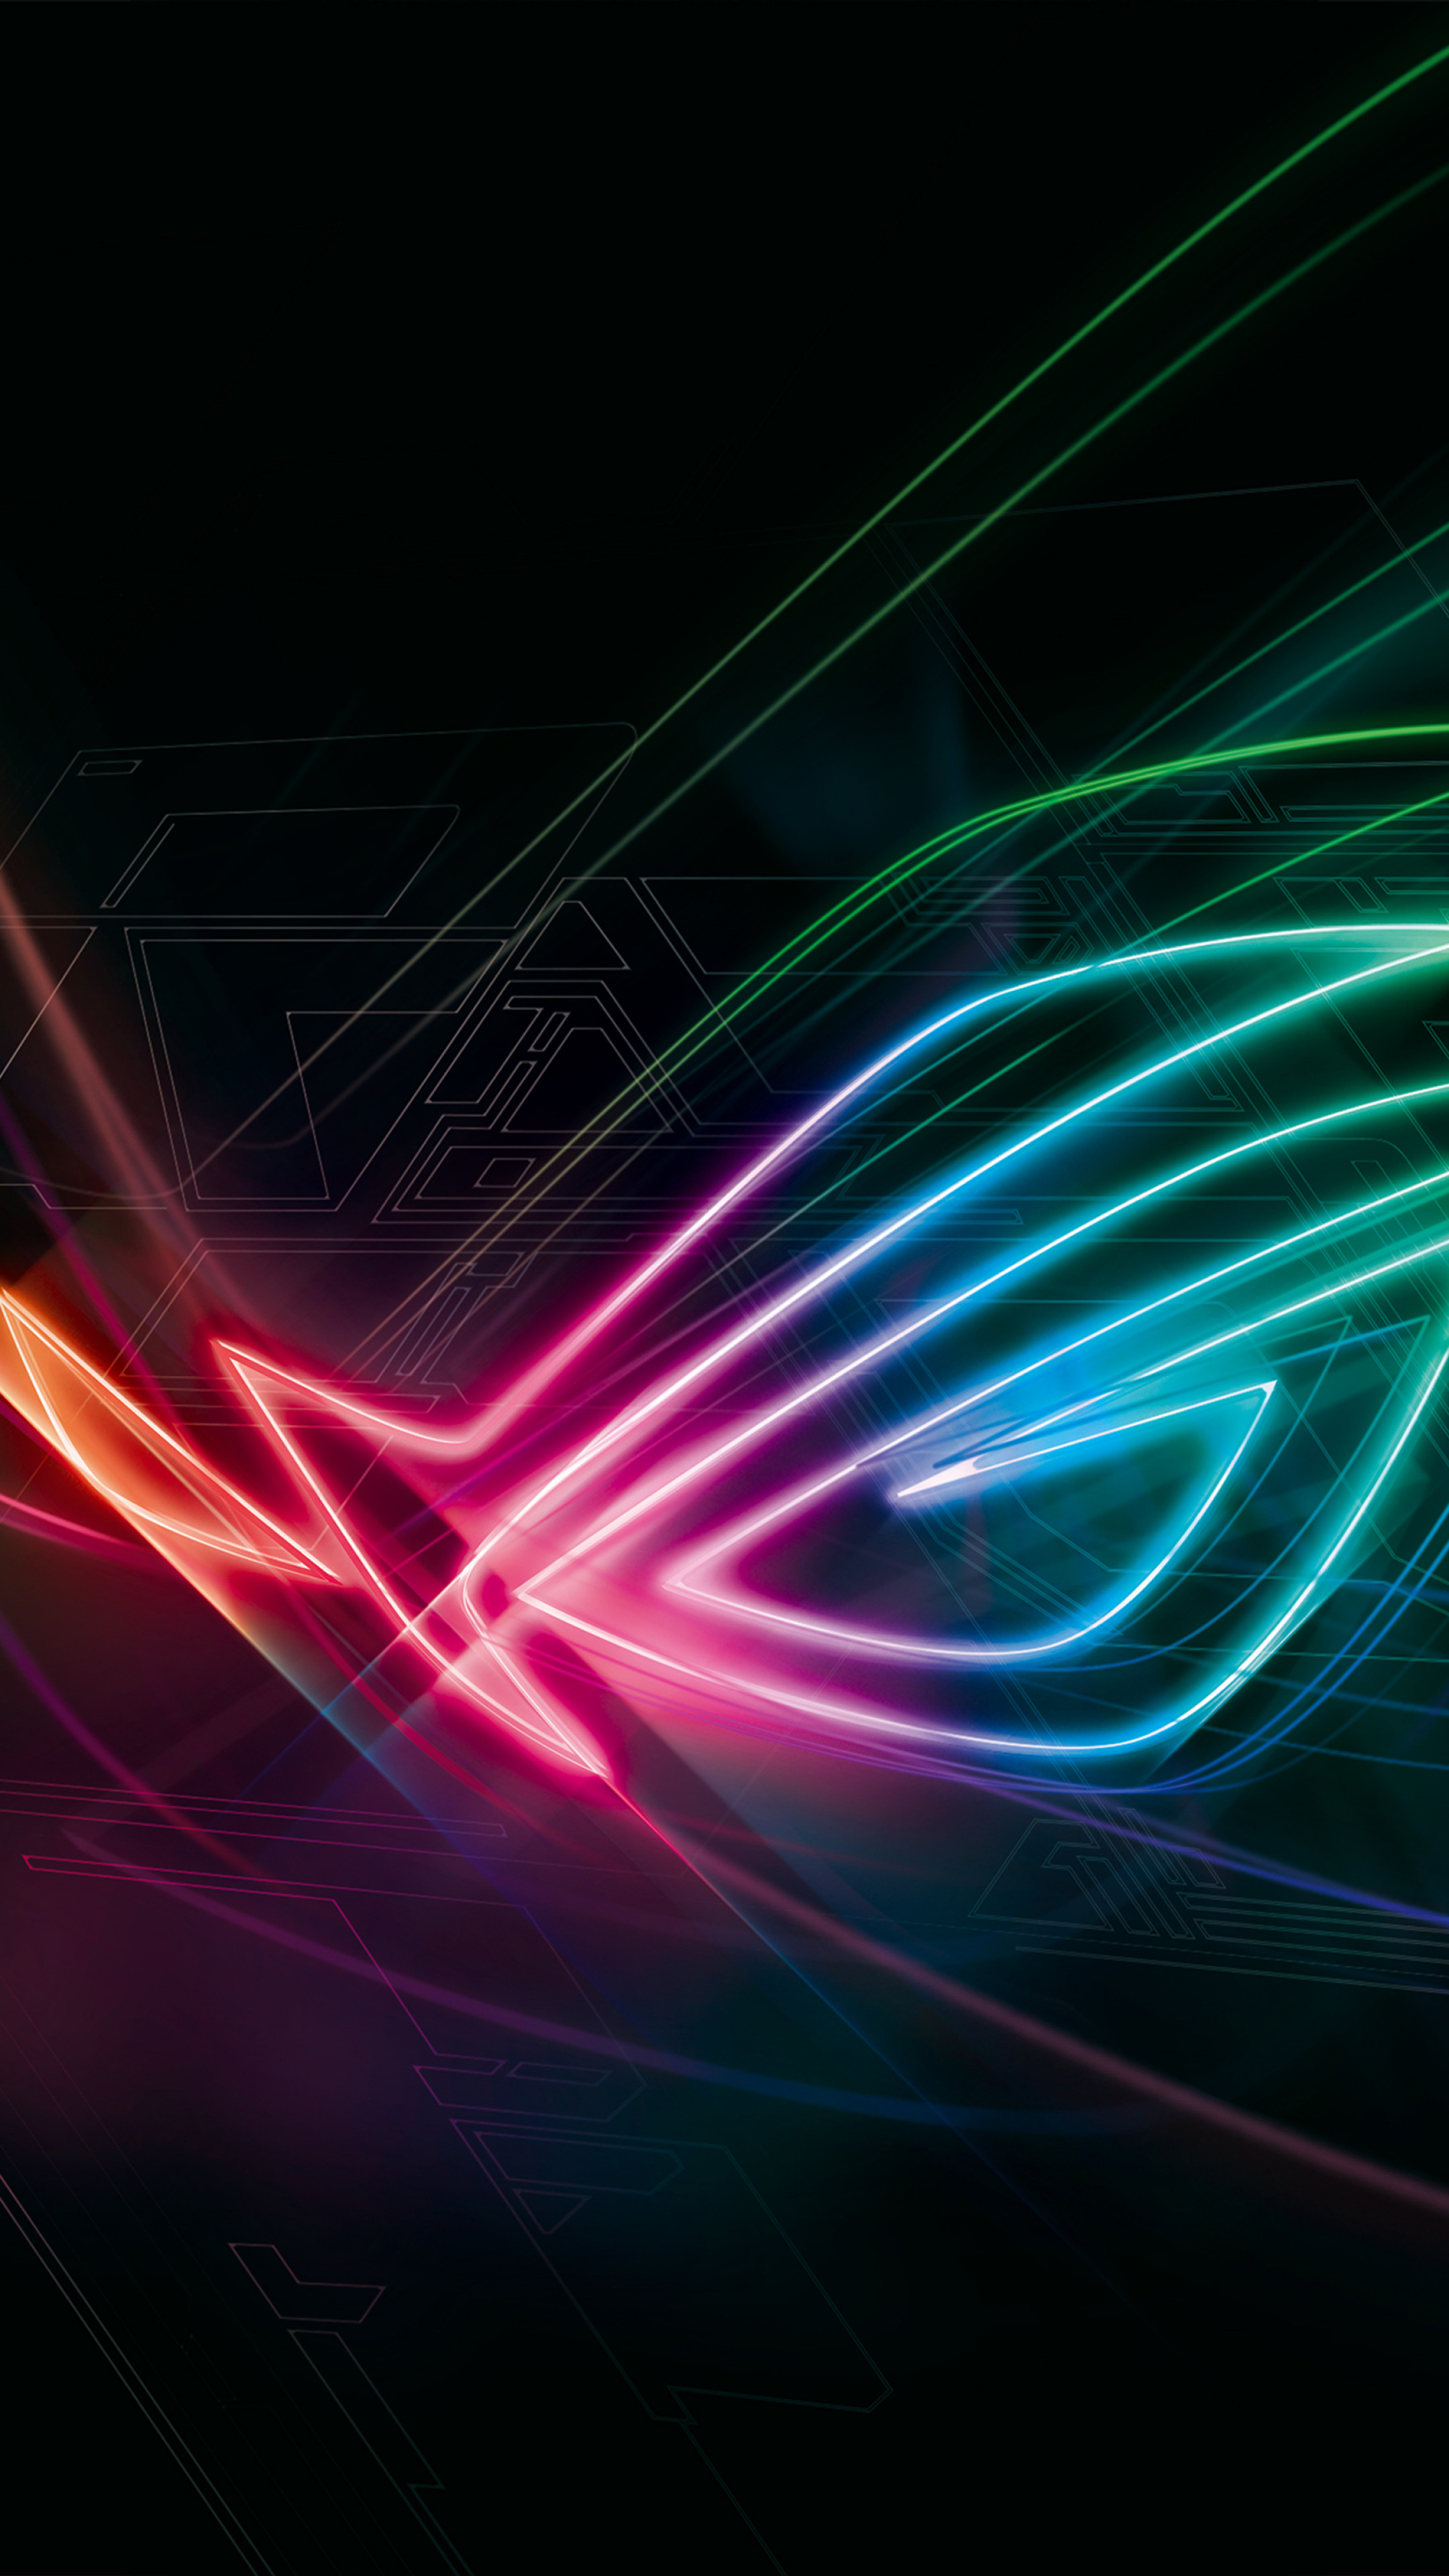 Wallpaper Asus Rog Phone 2 Colorful Android 9 Pie 4k Os 21977